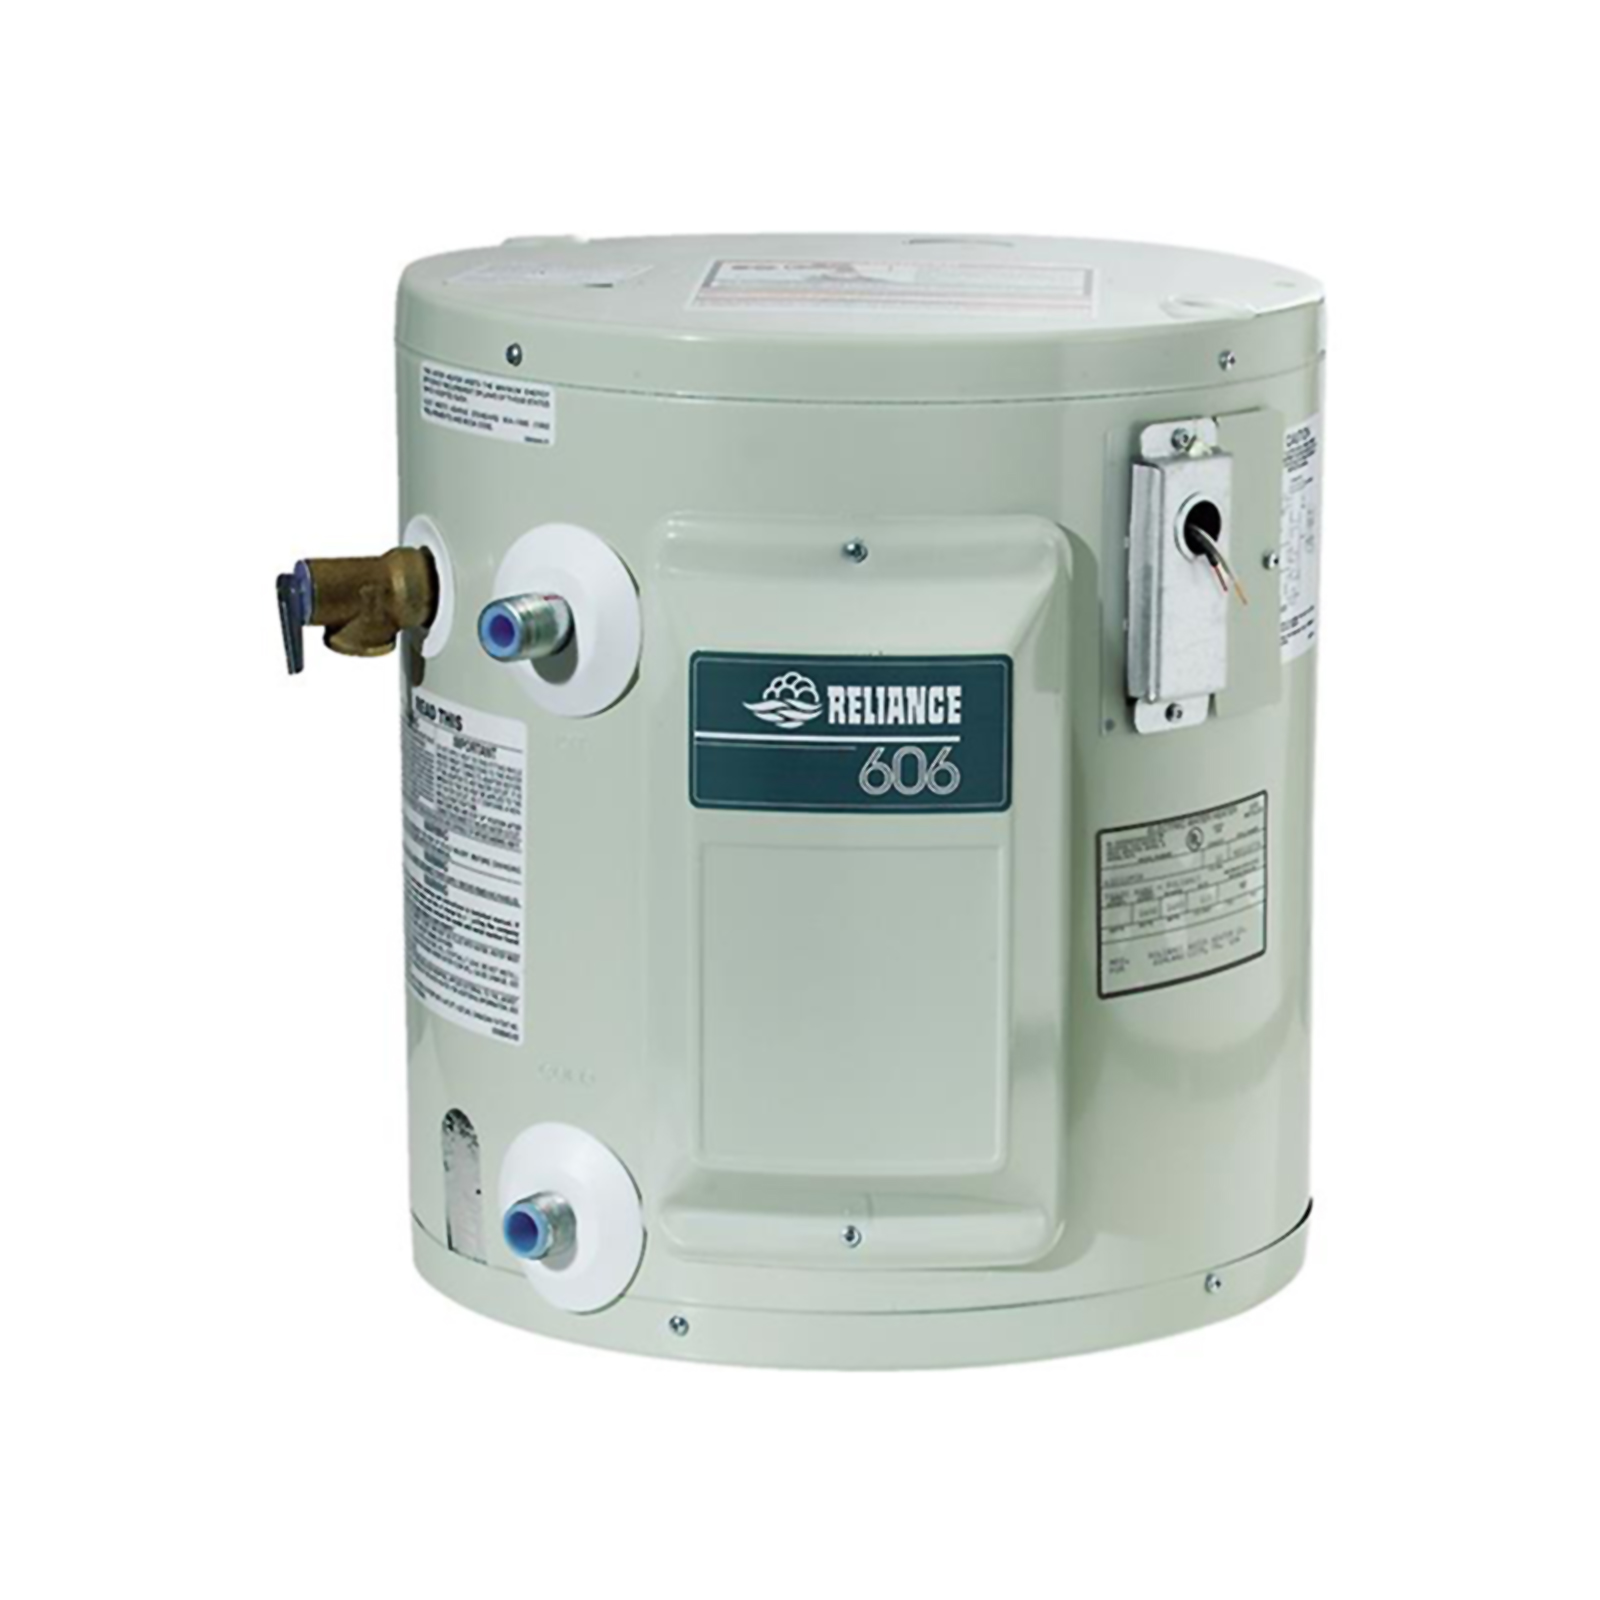 Reliance 6-6-SOMS K 6gal Compact Electric Water Heater